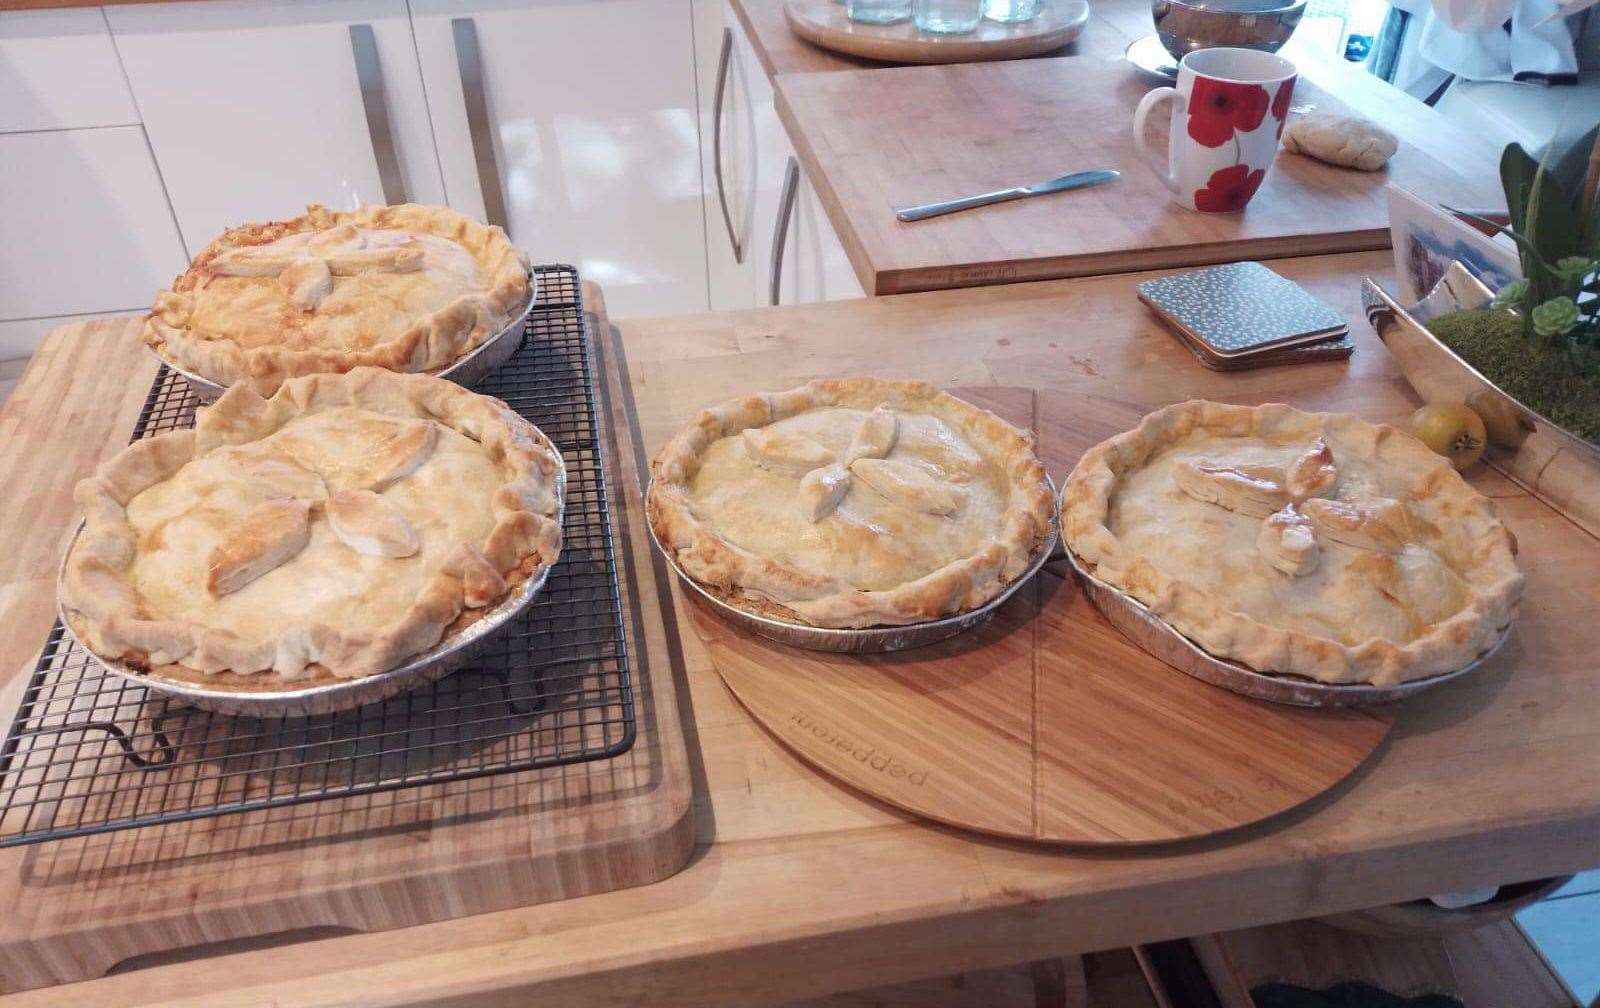 Cally Gale has made Bramley apple pies with fruit from her alloment. Photo: Cally Gale